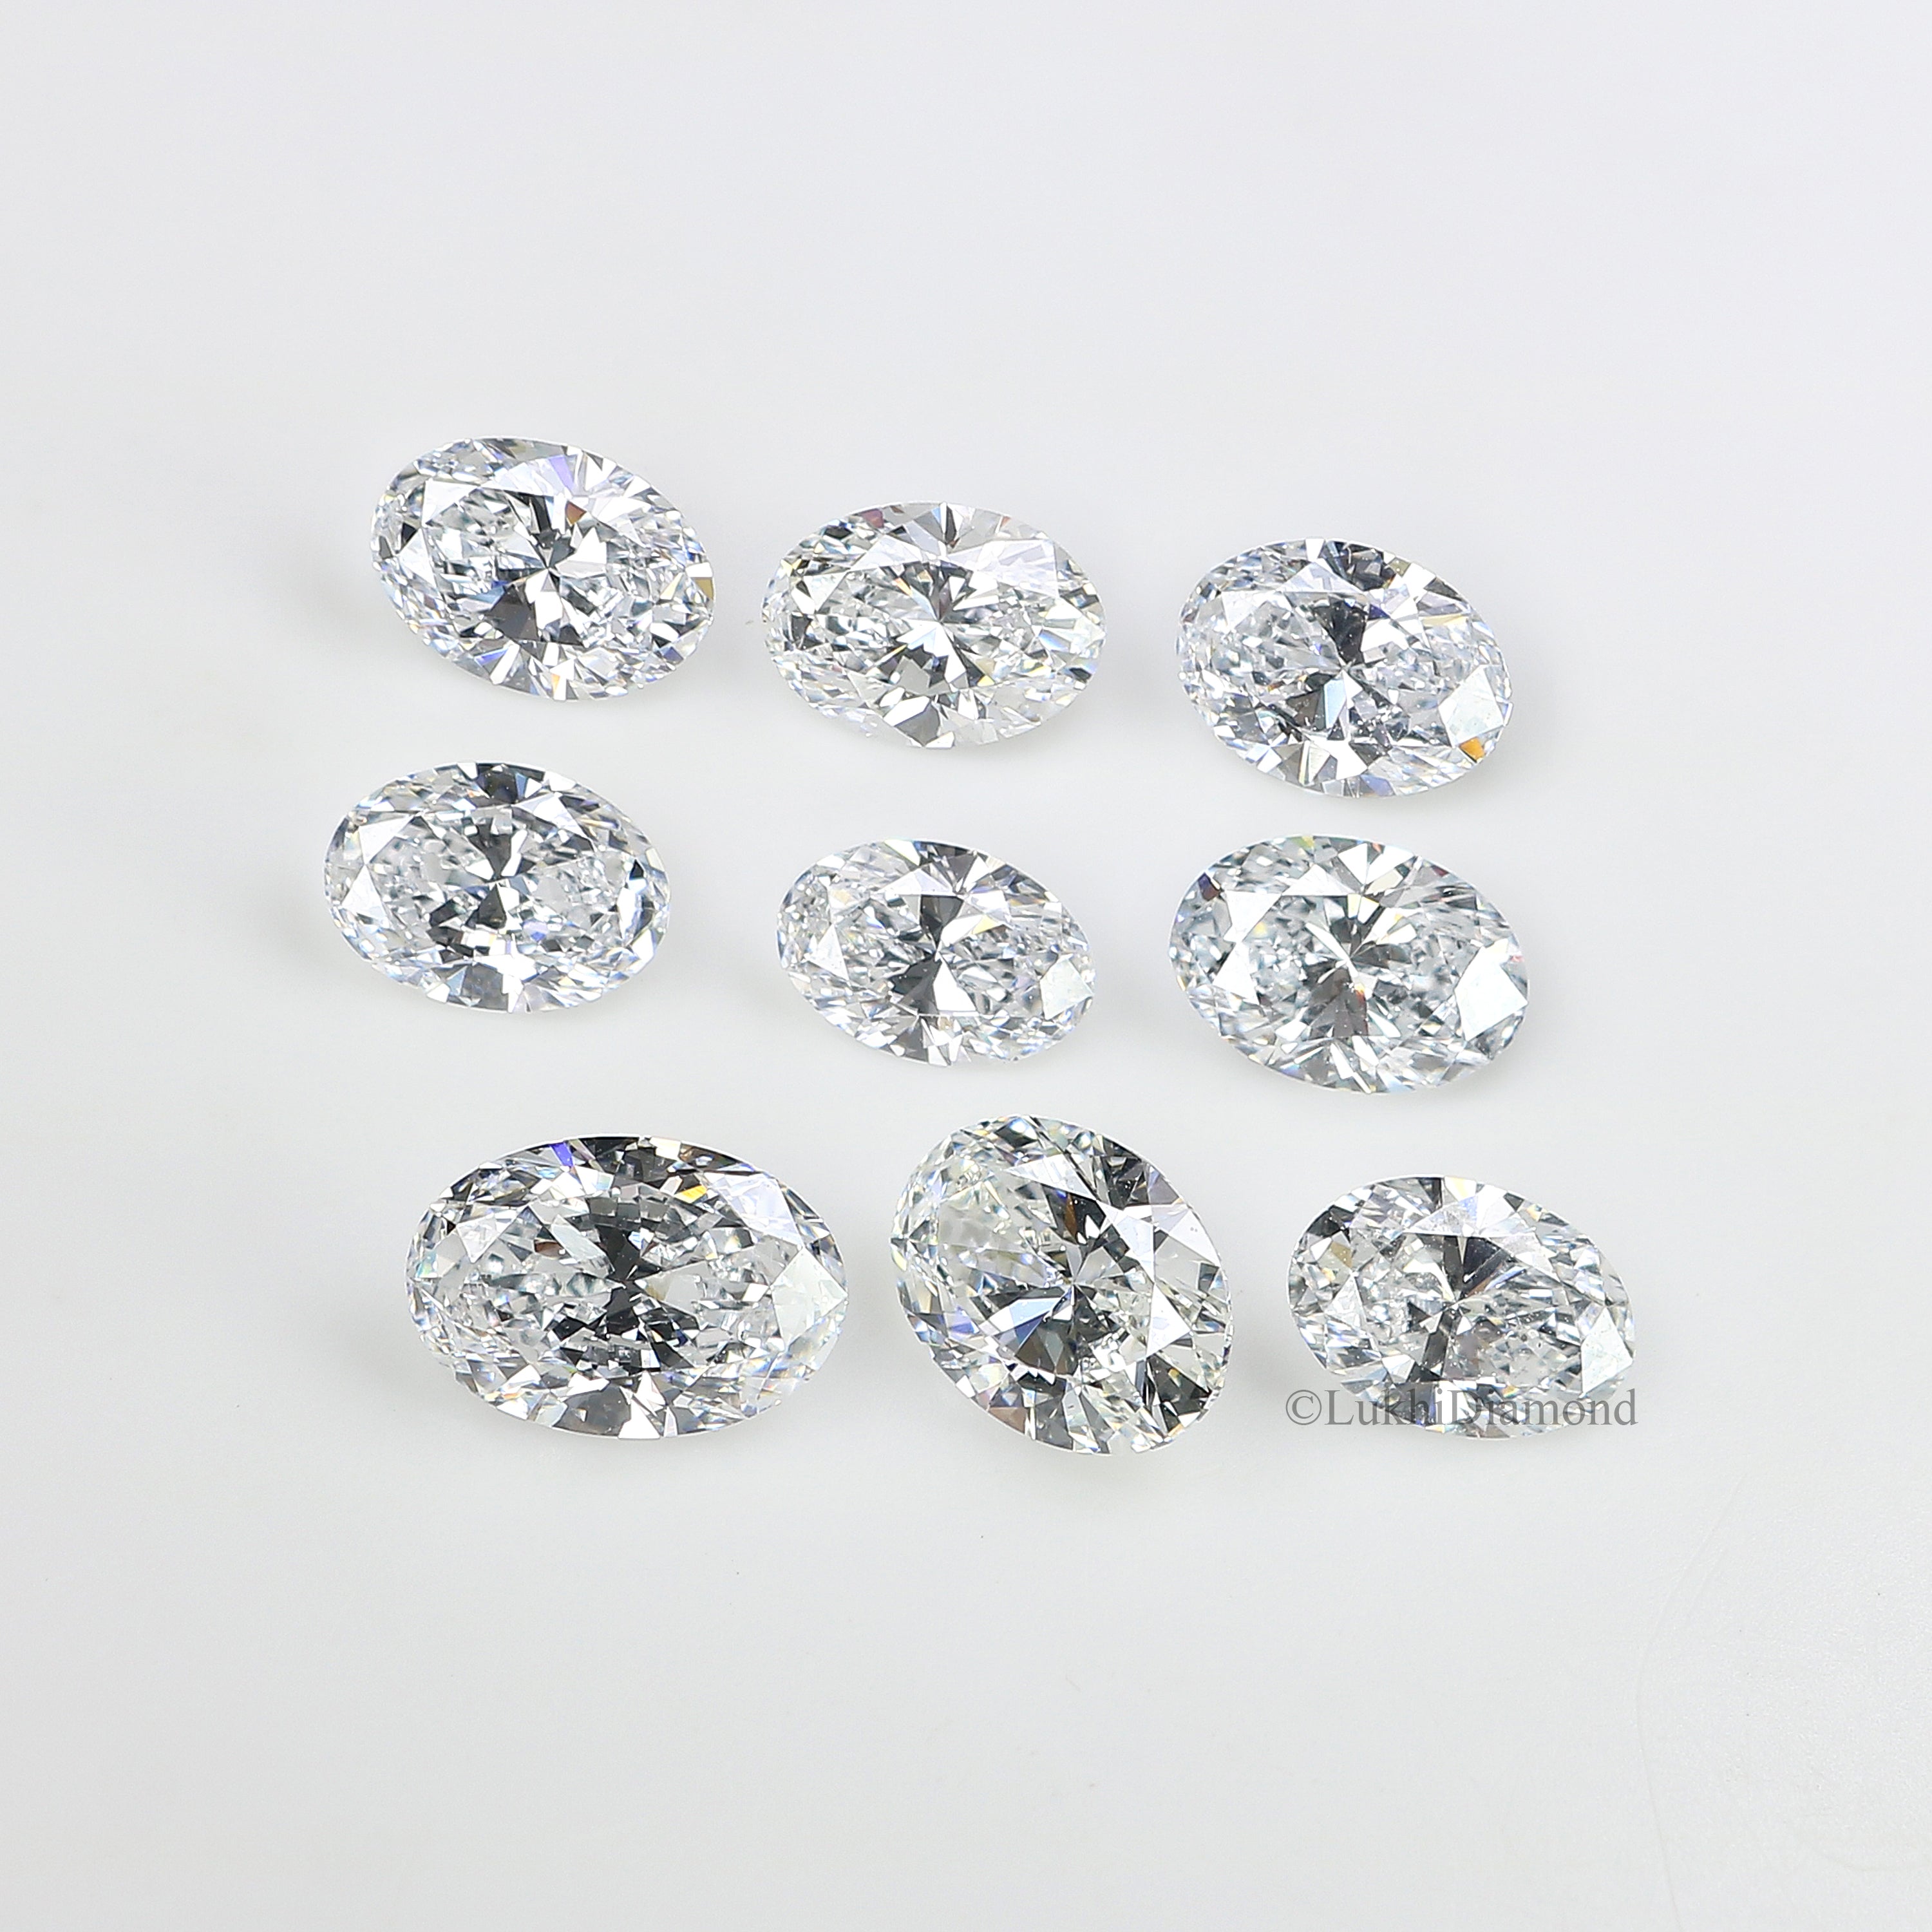 Oval Cut Lab Grown Diamond 4X3/5X3/6X4 MM Size Oval Loose Lab Man Made Diamond 2 PCs Pair For Earring Gift For Her Engagement Ring Q162